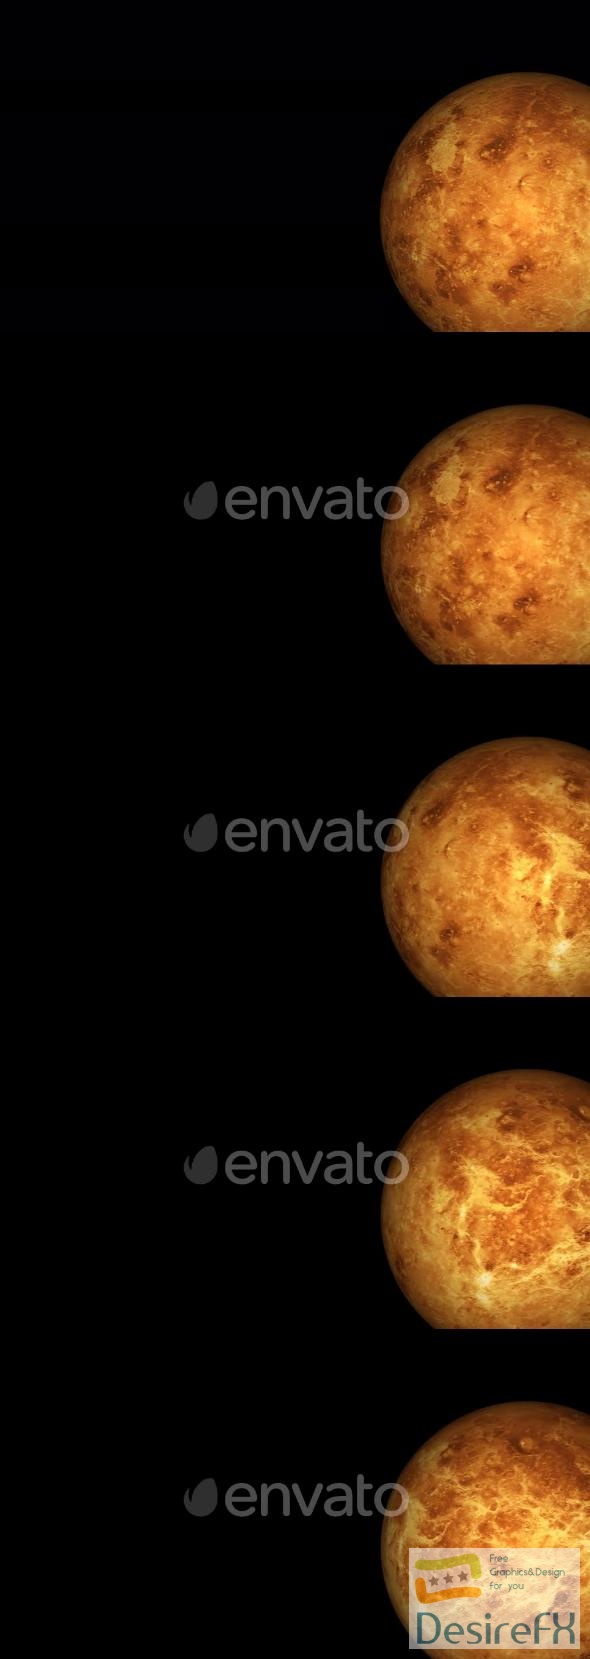 VideoHive Venues planet rotating with black background 47563648